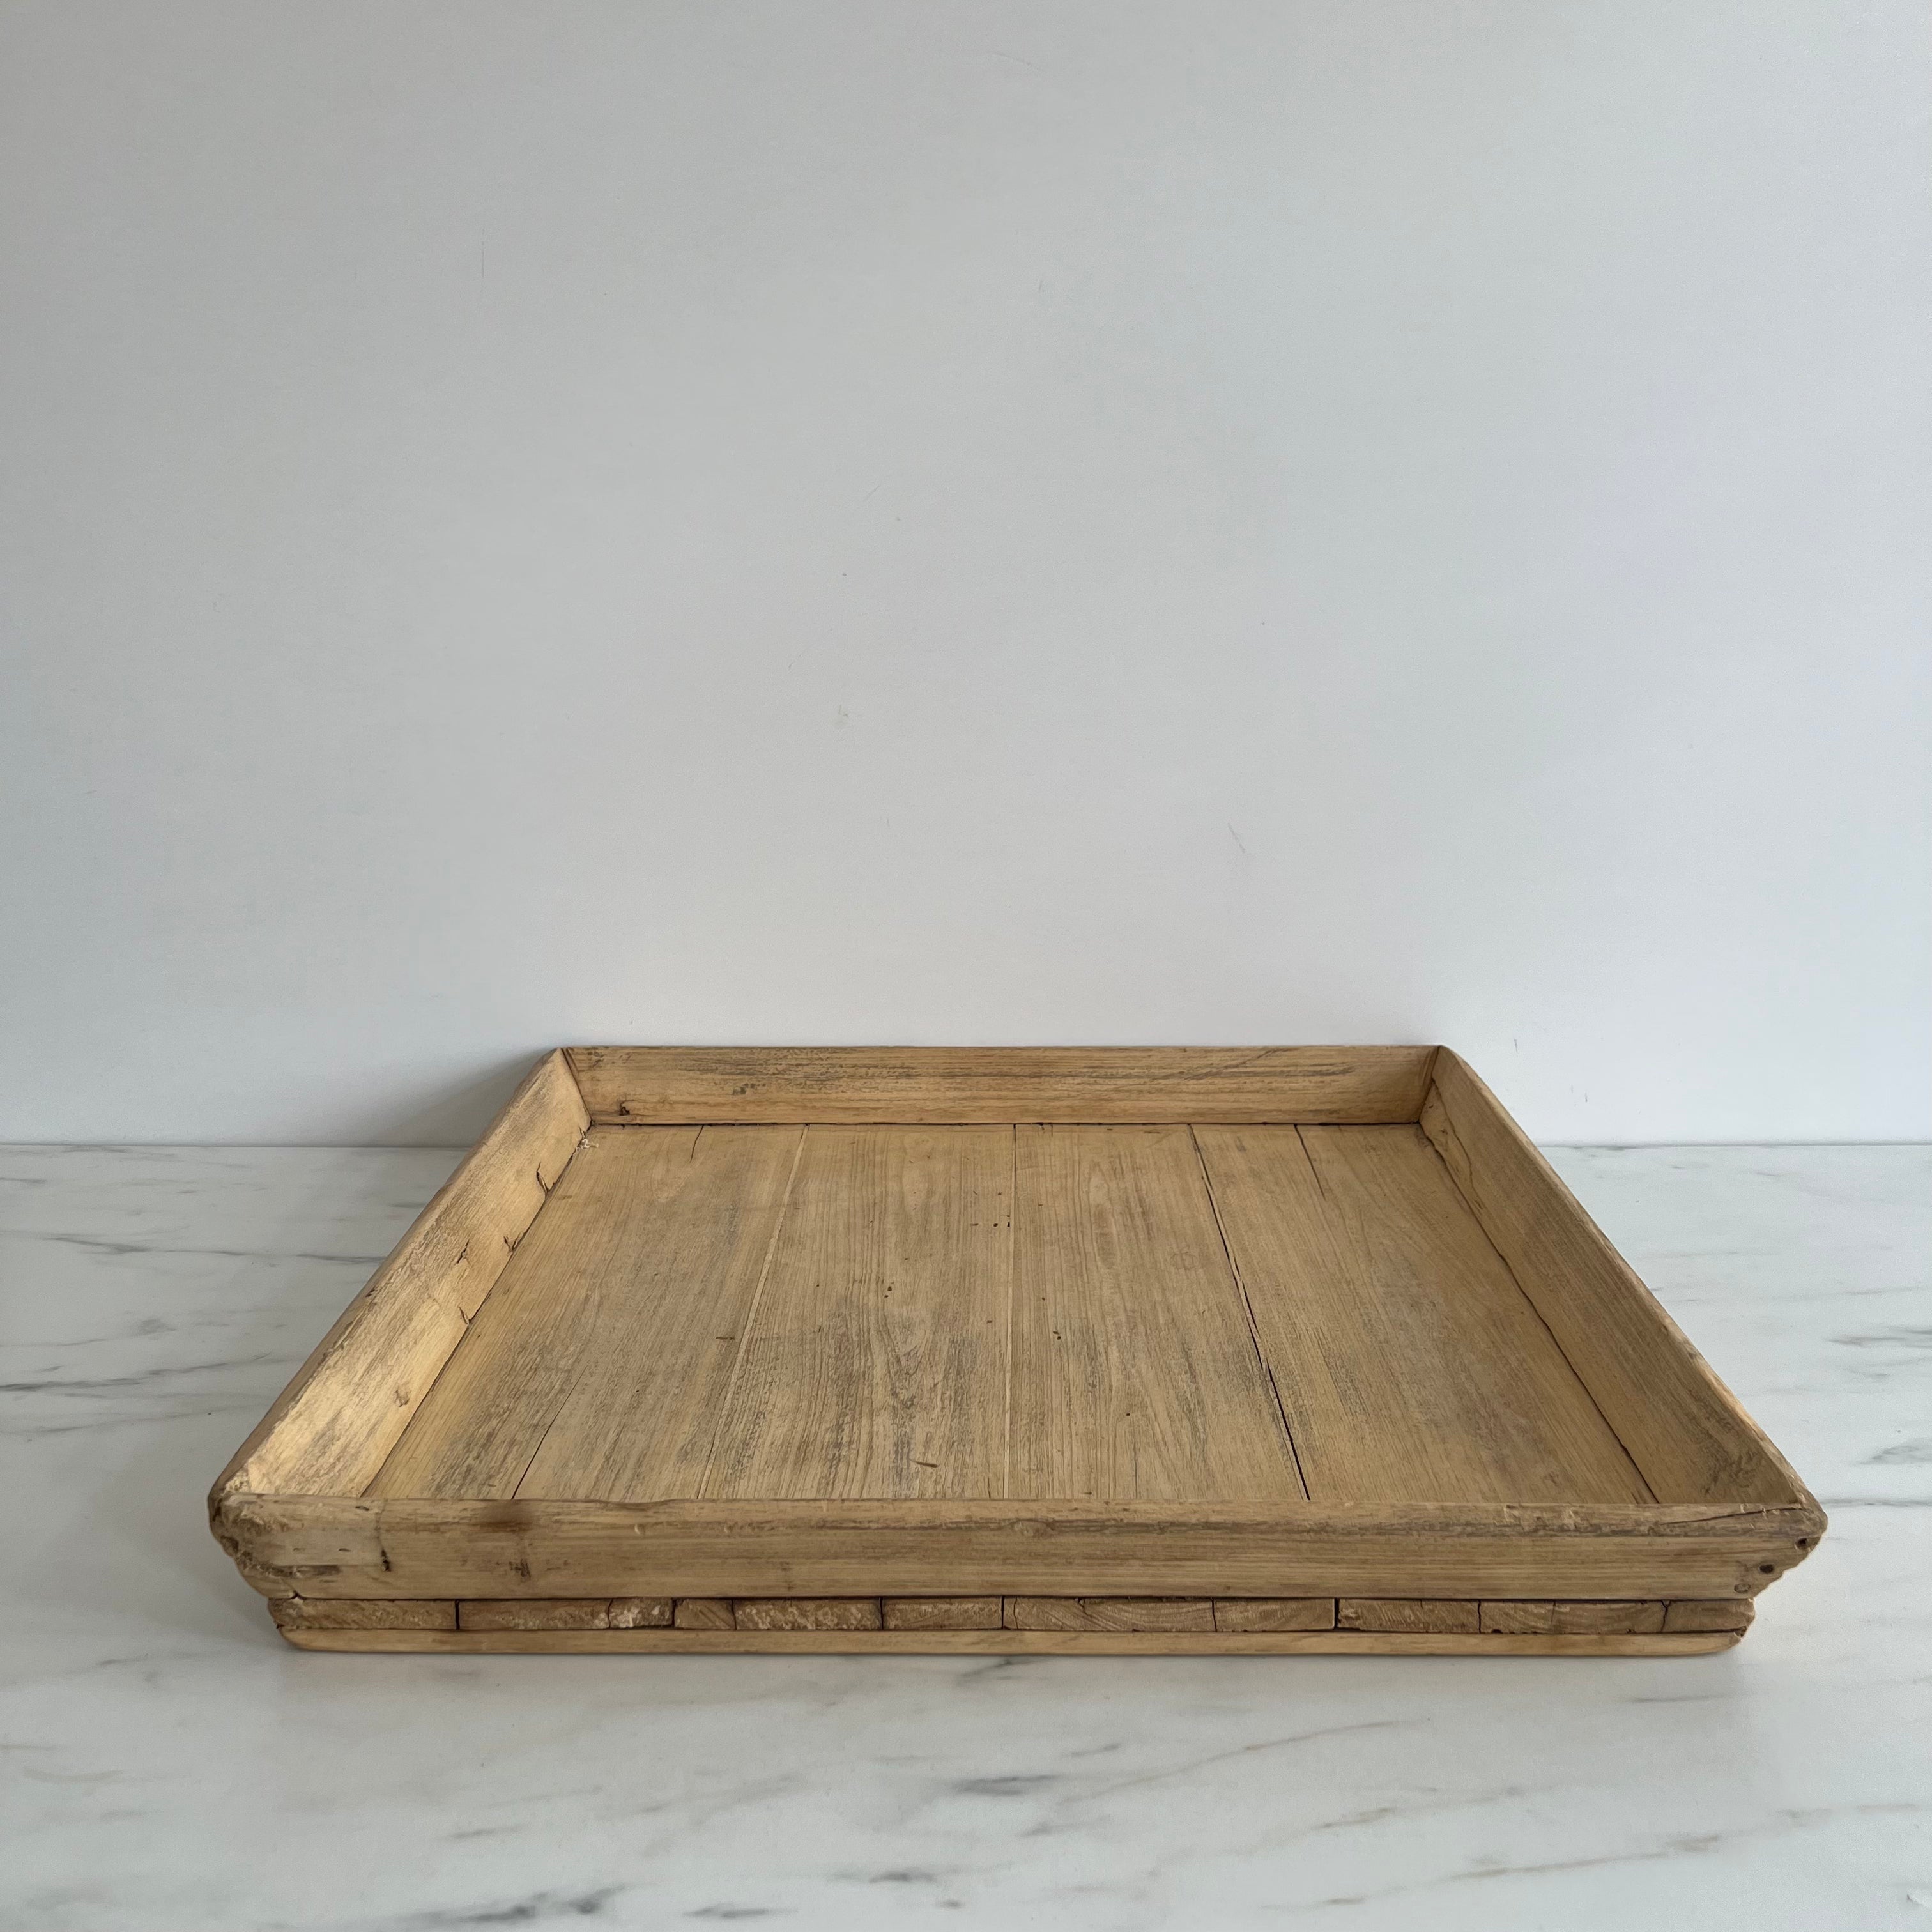 Flat Vintage Wooden Tray No. 3 - Rug & Weave